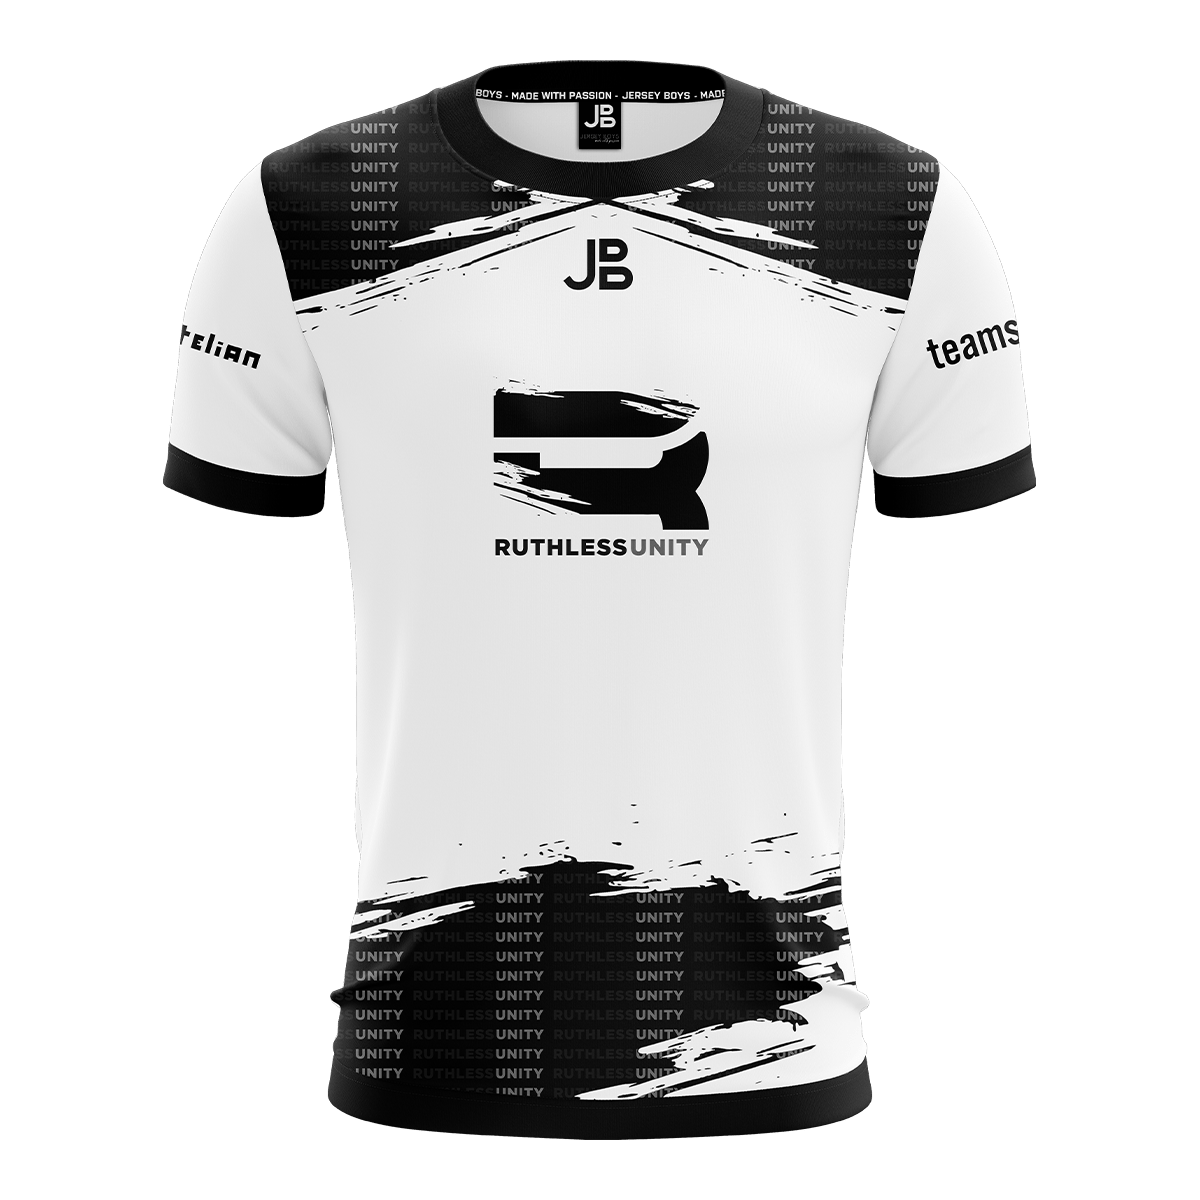 RUTHLESS UNITY 3rd - Jersey 2020